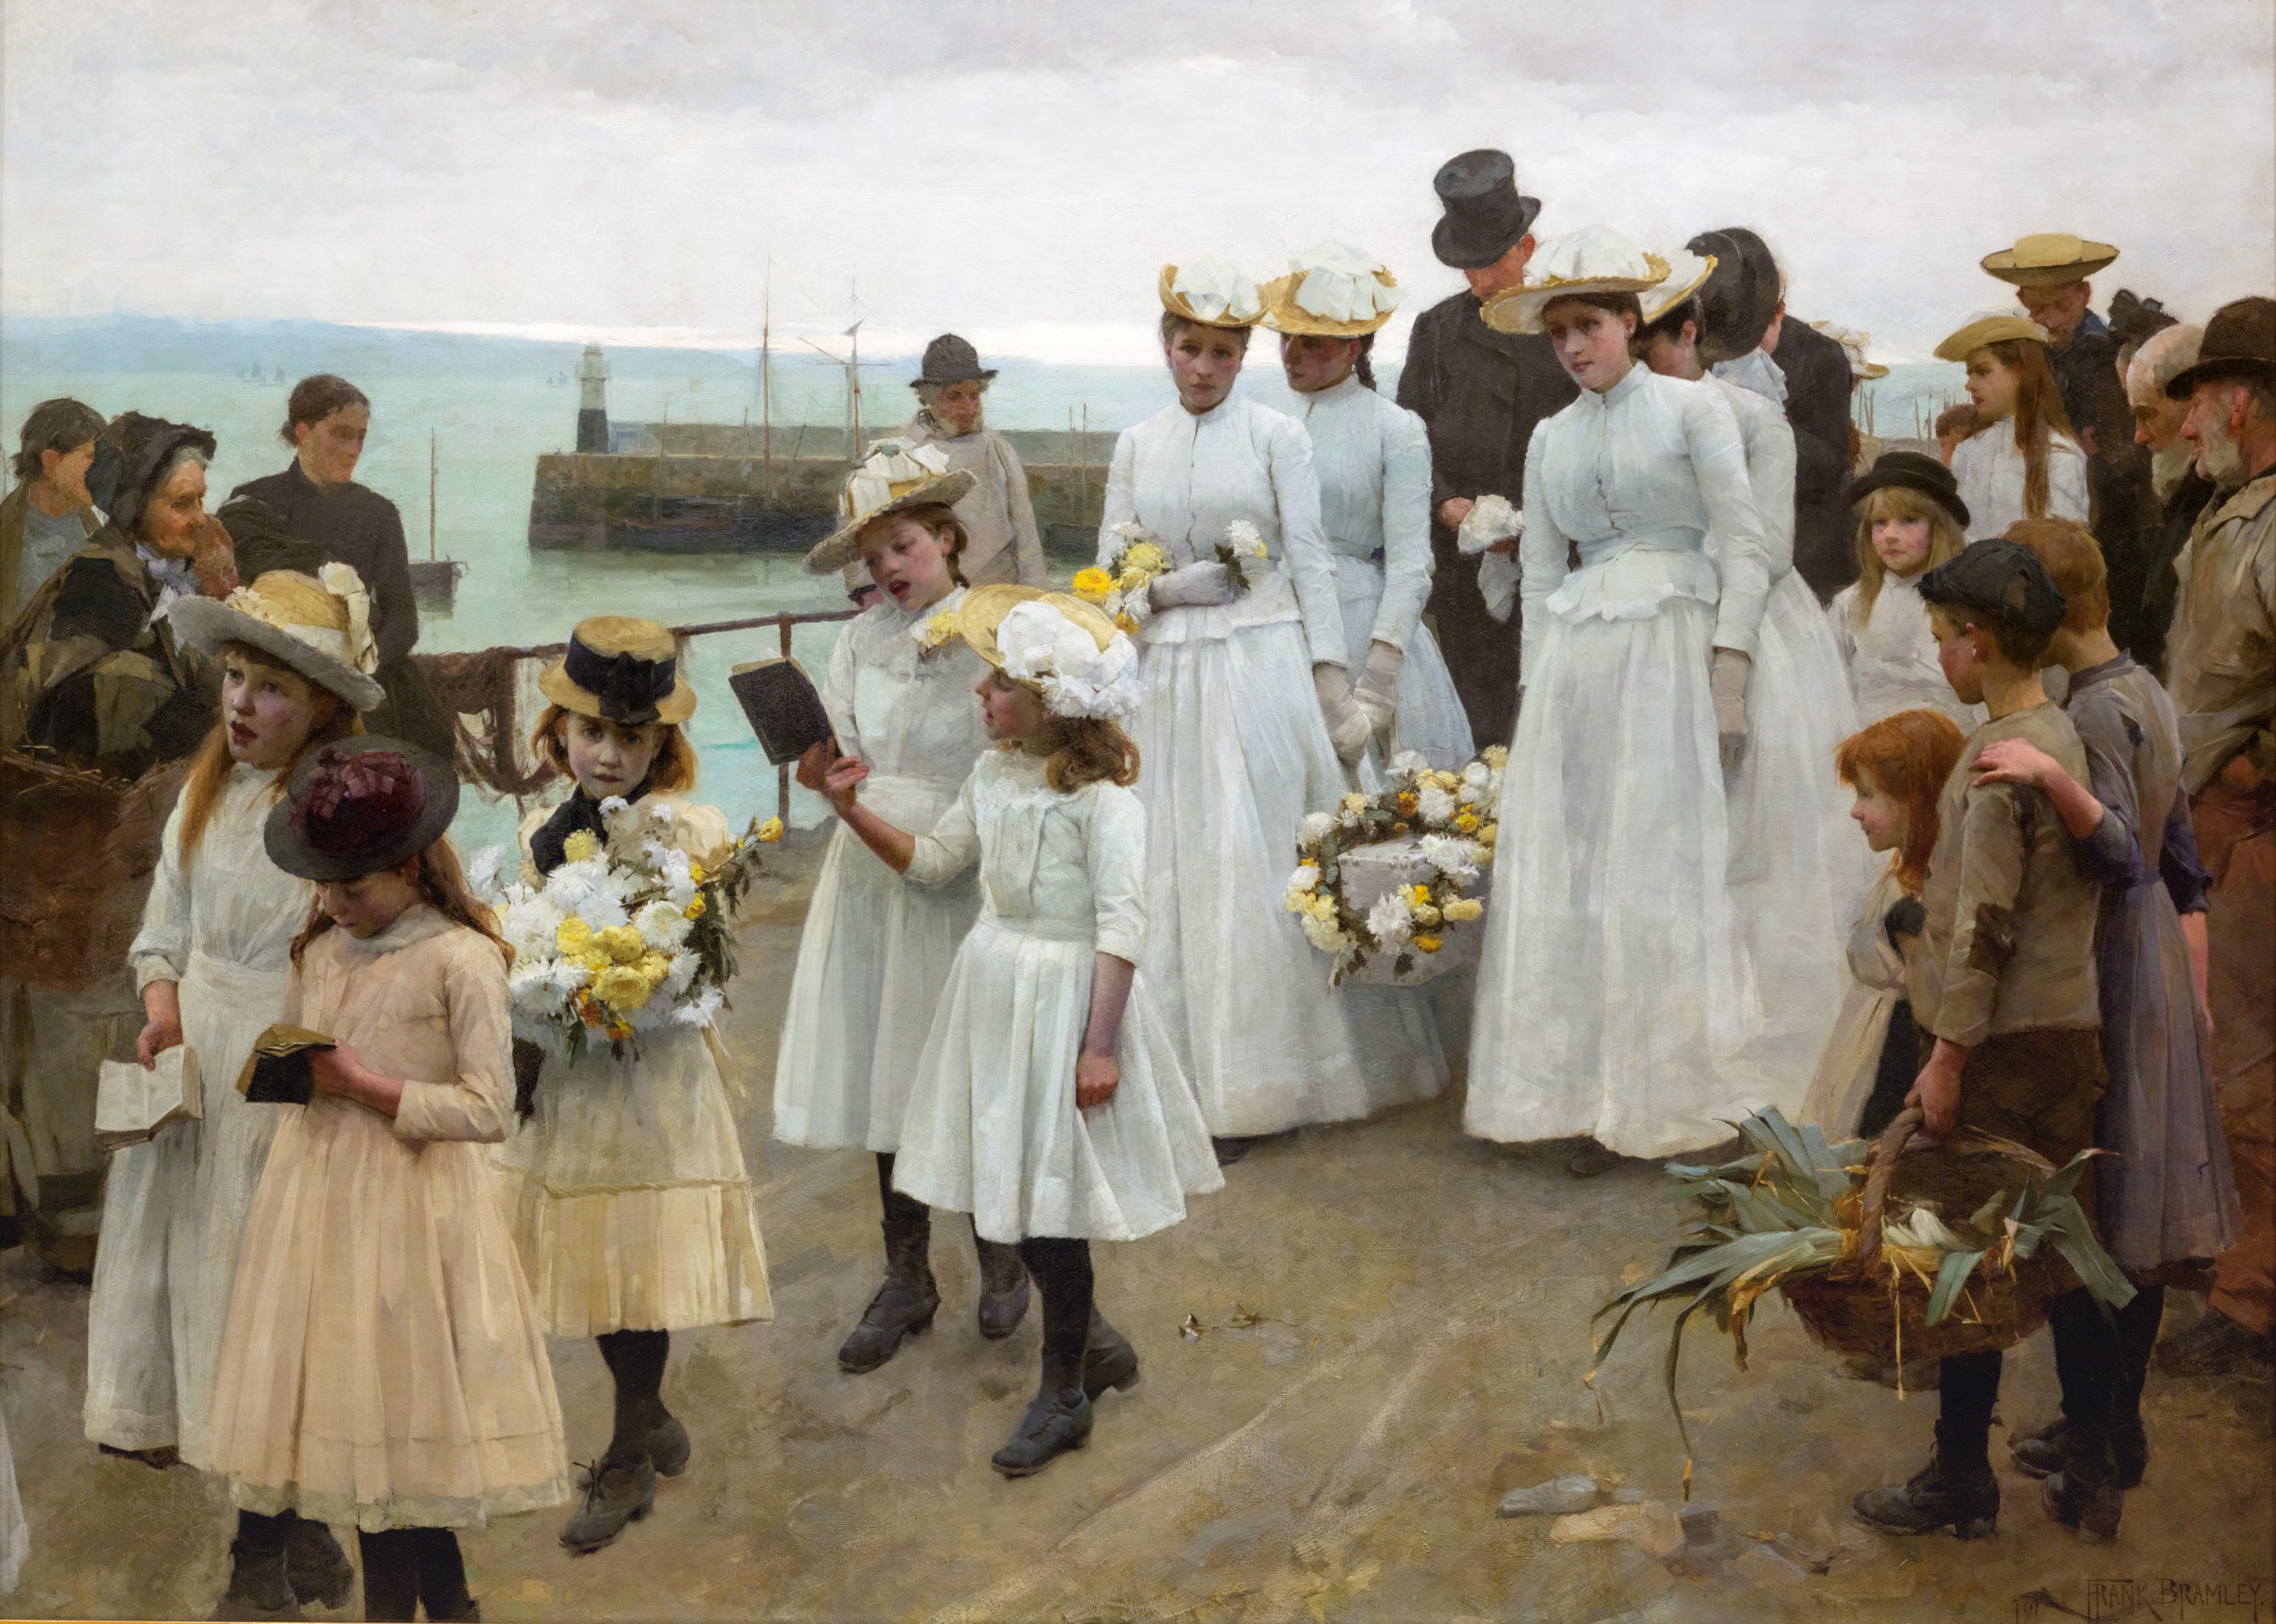 <p><strong>Frank Bramley</strong><br />
<em>For of such is the Kingdom of Heaven</em> 1891<br />
Mackelvie Trust Collection, Auckland Art Gallery Toi o Tāmaki, purchased 1913</p>

<p>&nbsp;</p>